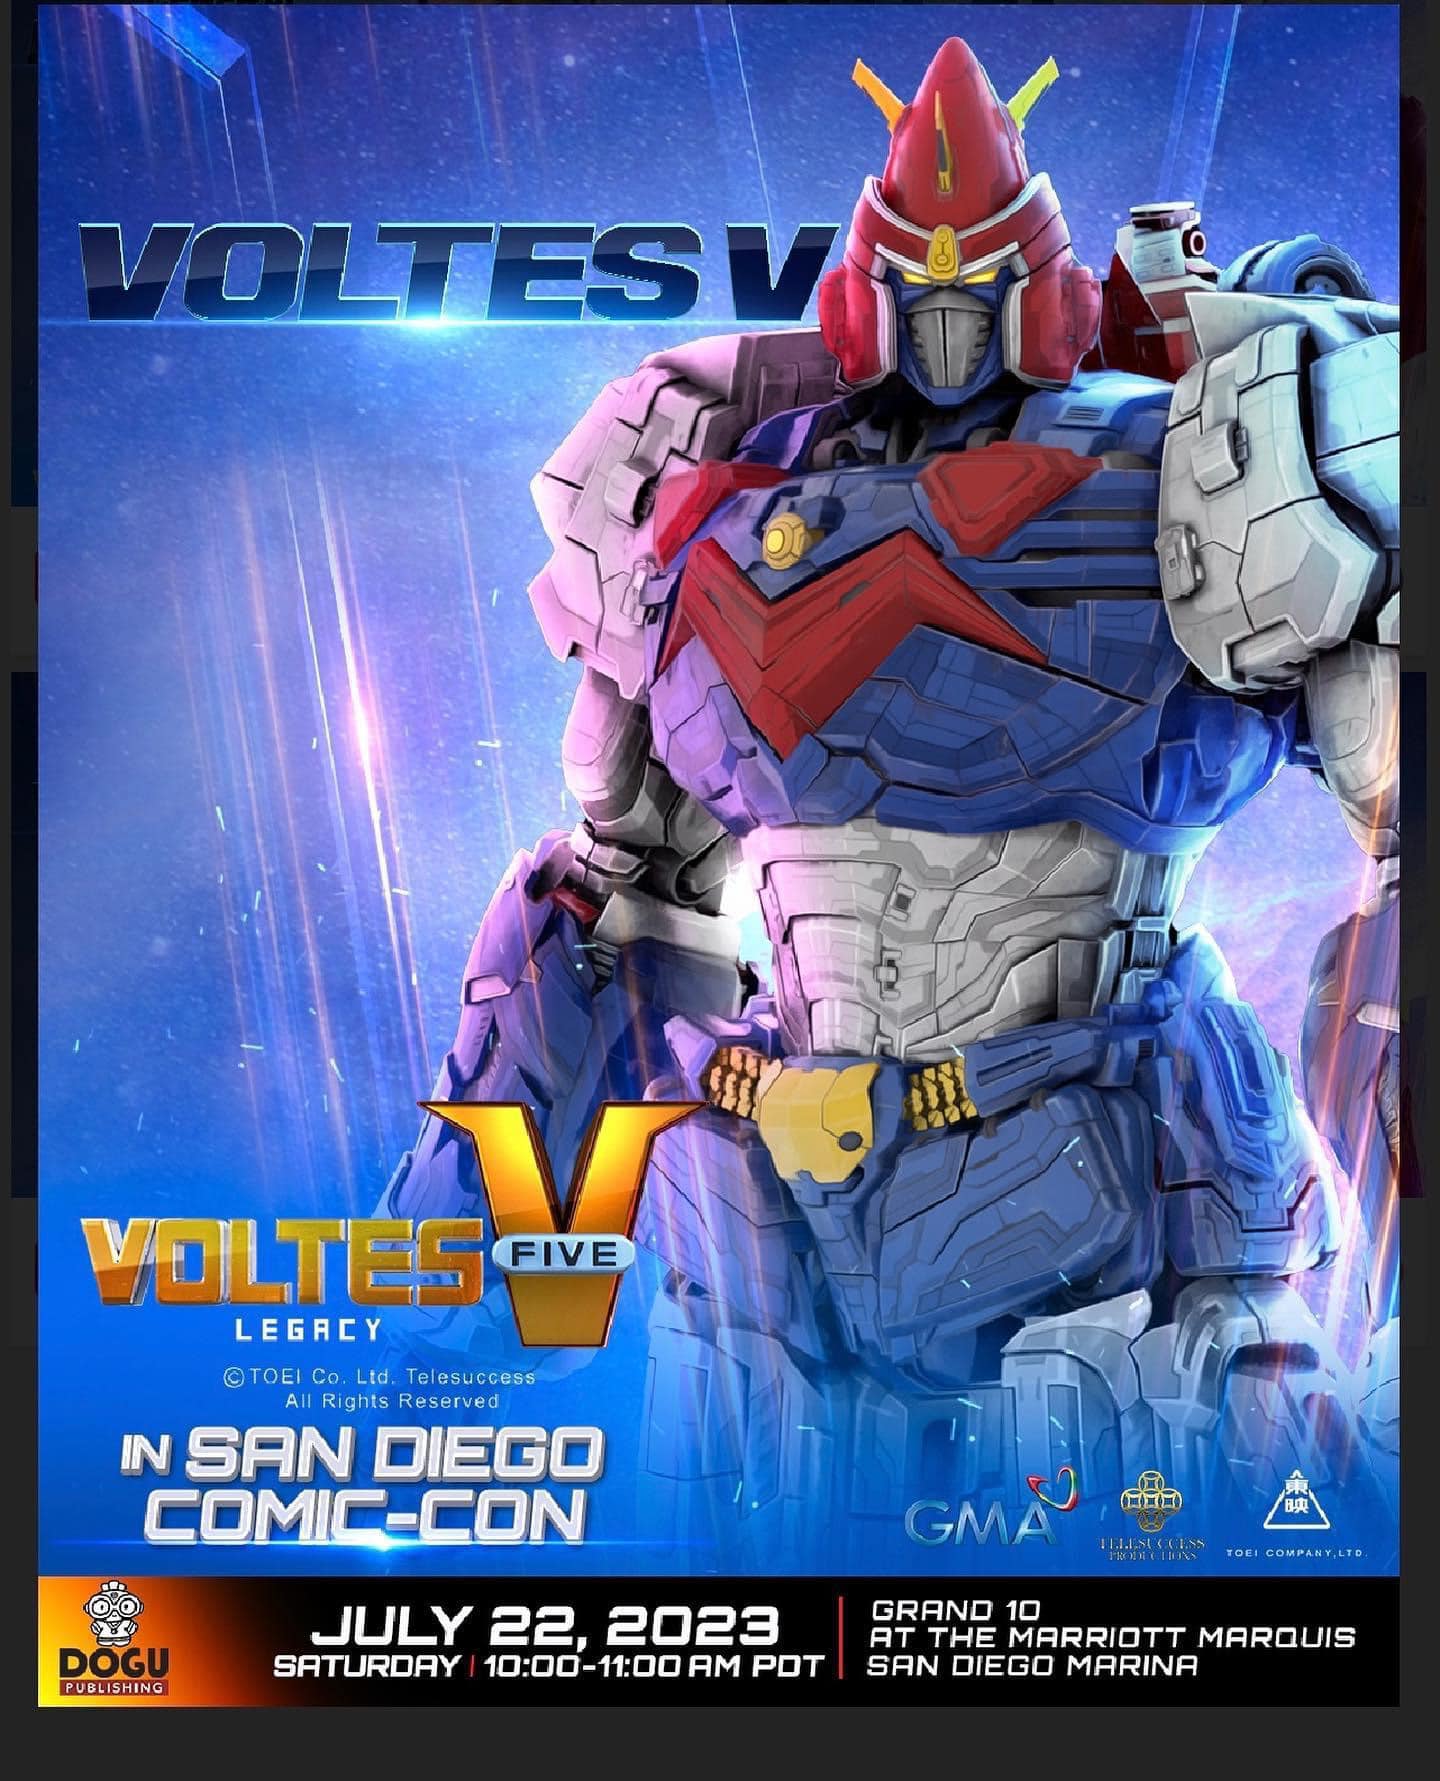 Voltes V: Legacy Plants Filipino Flag For First Time At SDCC 2023